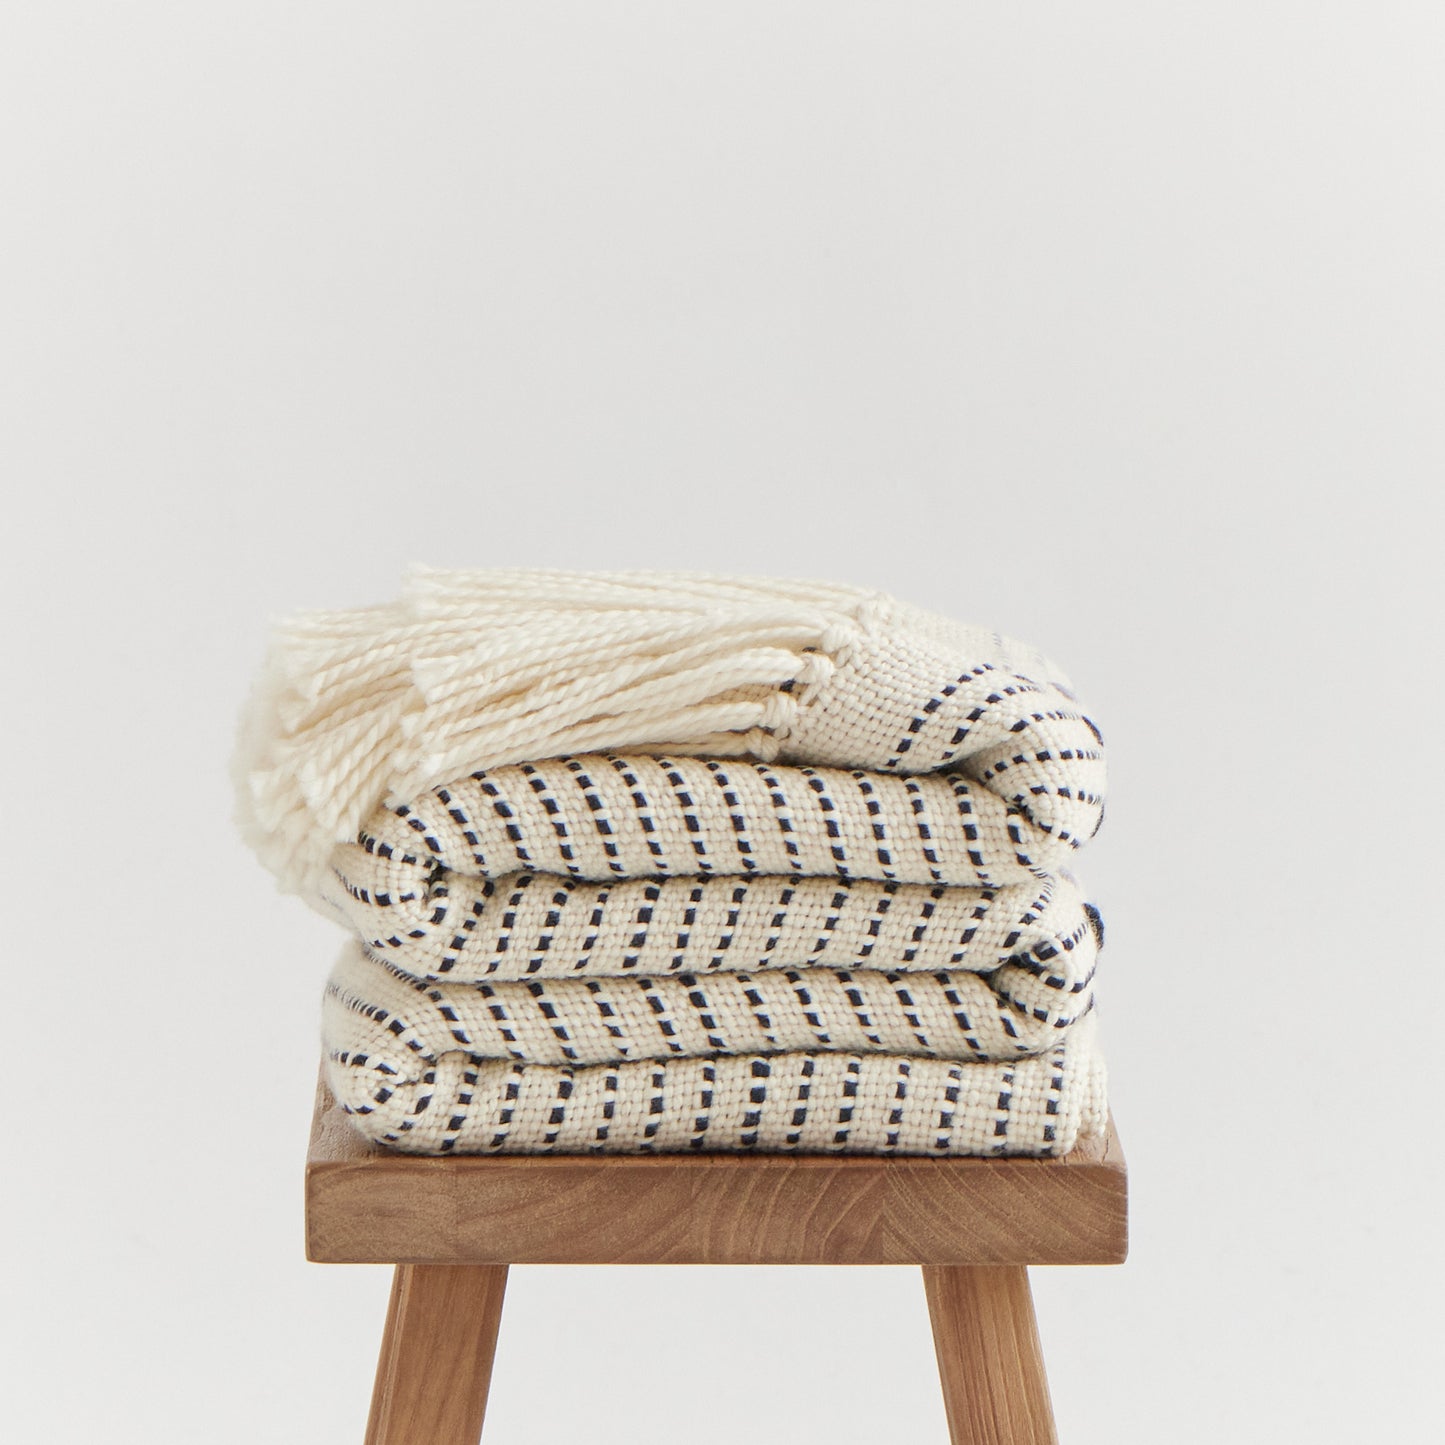 Embroidered Blanket Hand Woven with Detailed Artisanal Design Iris